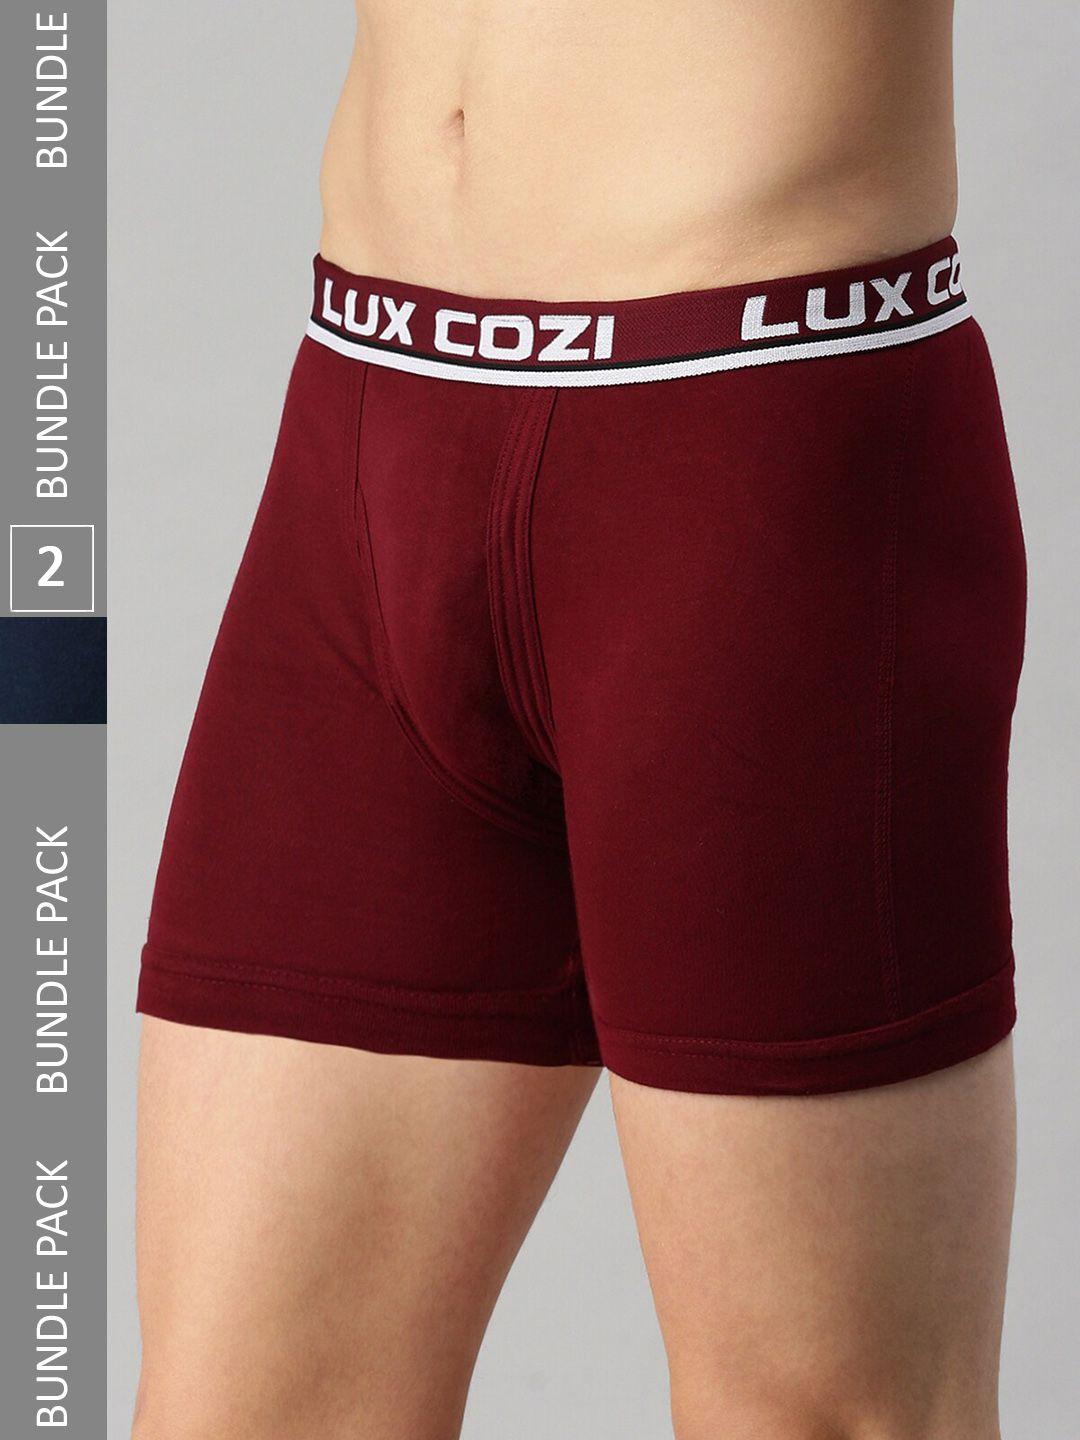 lux cozi pack of 2 outer elastic trunks